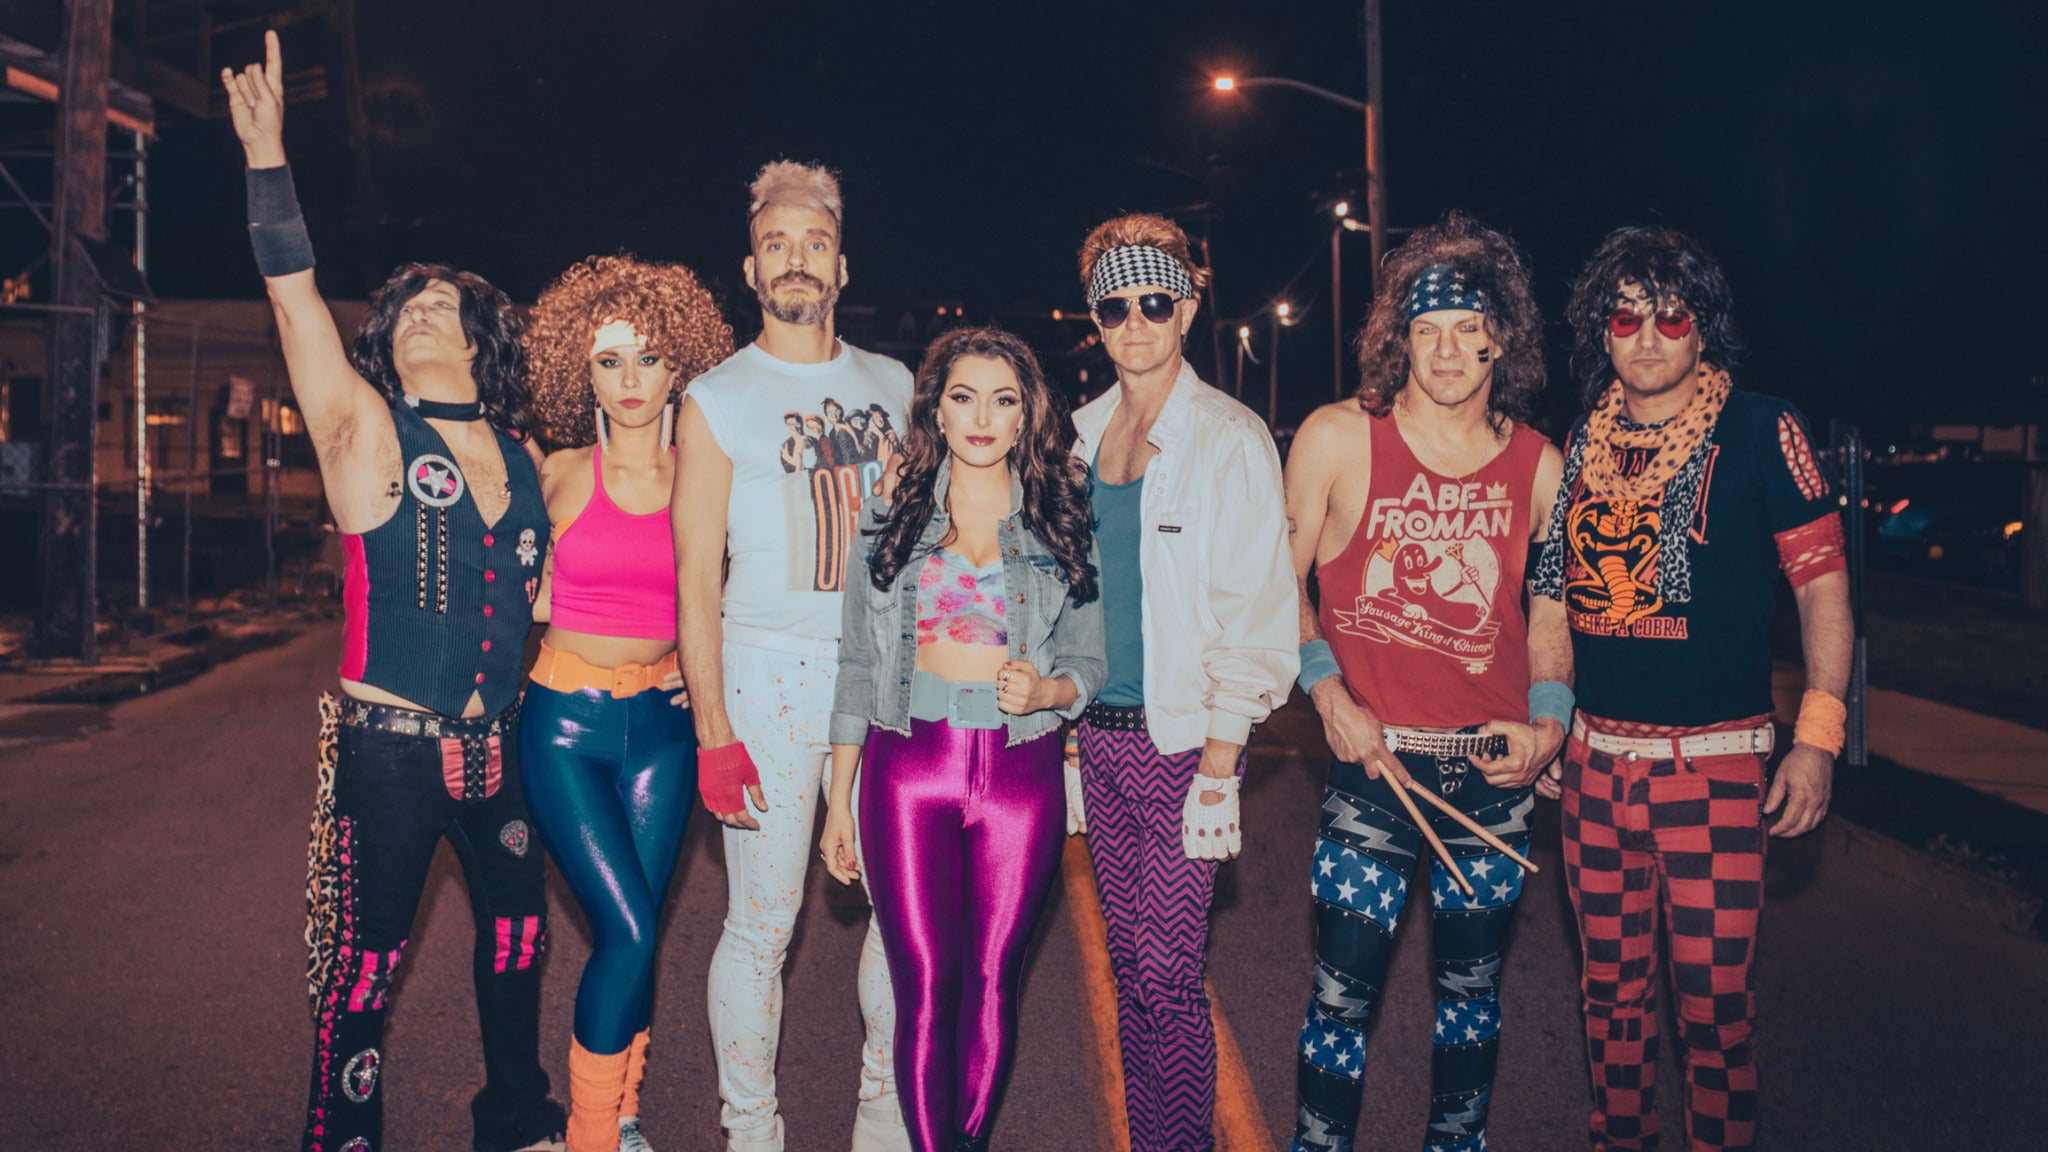 Back To The Eighties with Jessie's Girl presale passcode for concert tickets in Huntington, NY (The Paramount)